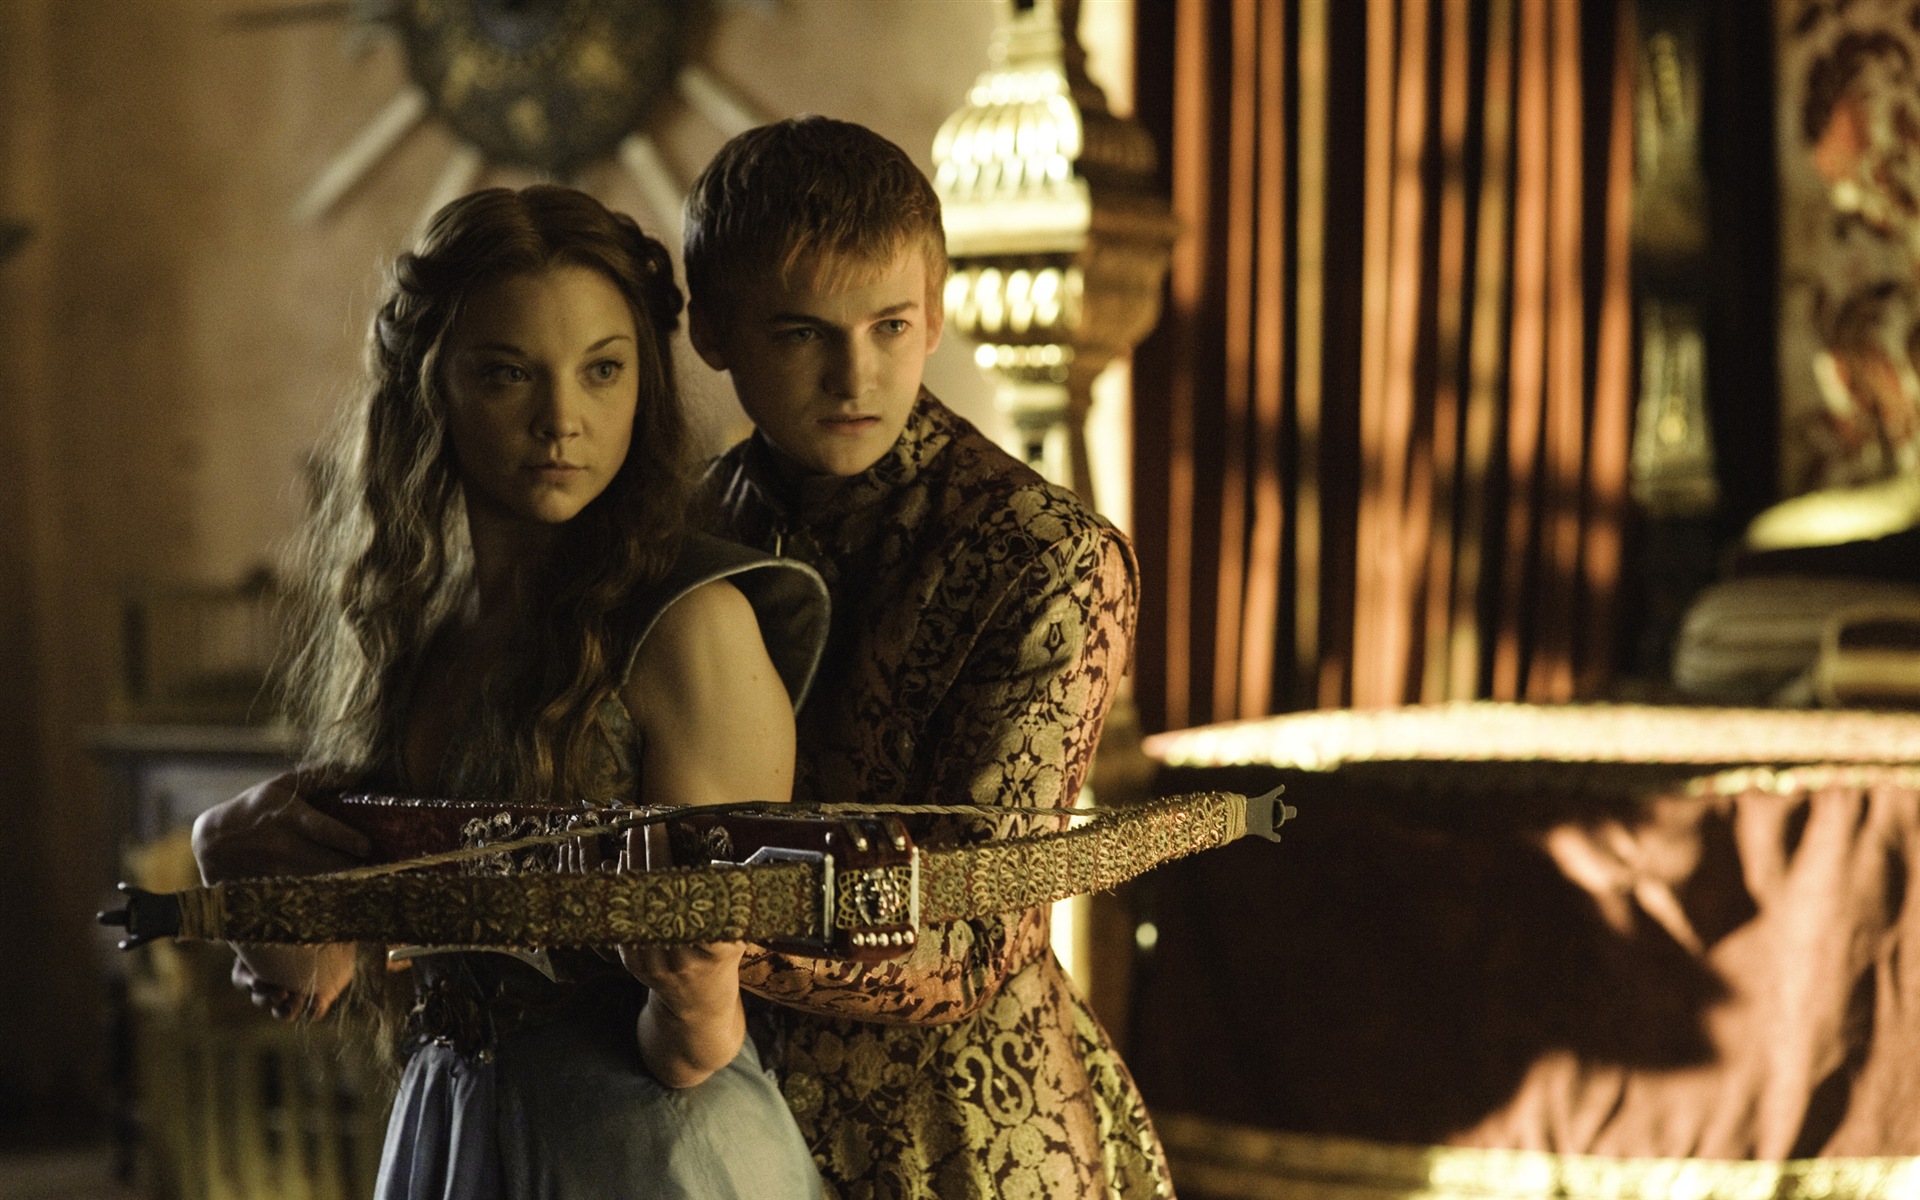 A Song of Ice and Fire: Game of Thrones 冰與火之歌：權力的遊戲高清壁紙 #38 - 1920x1200